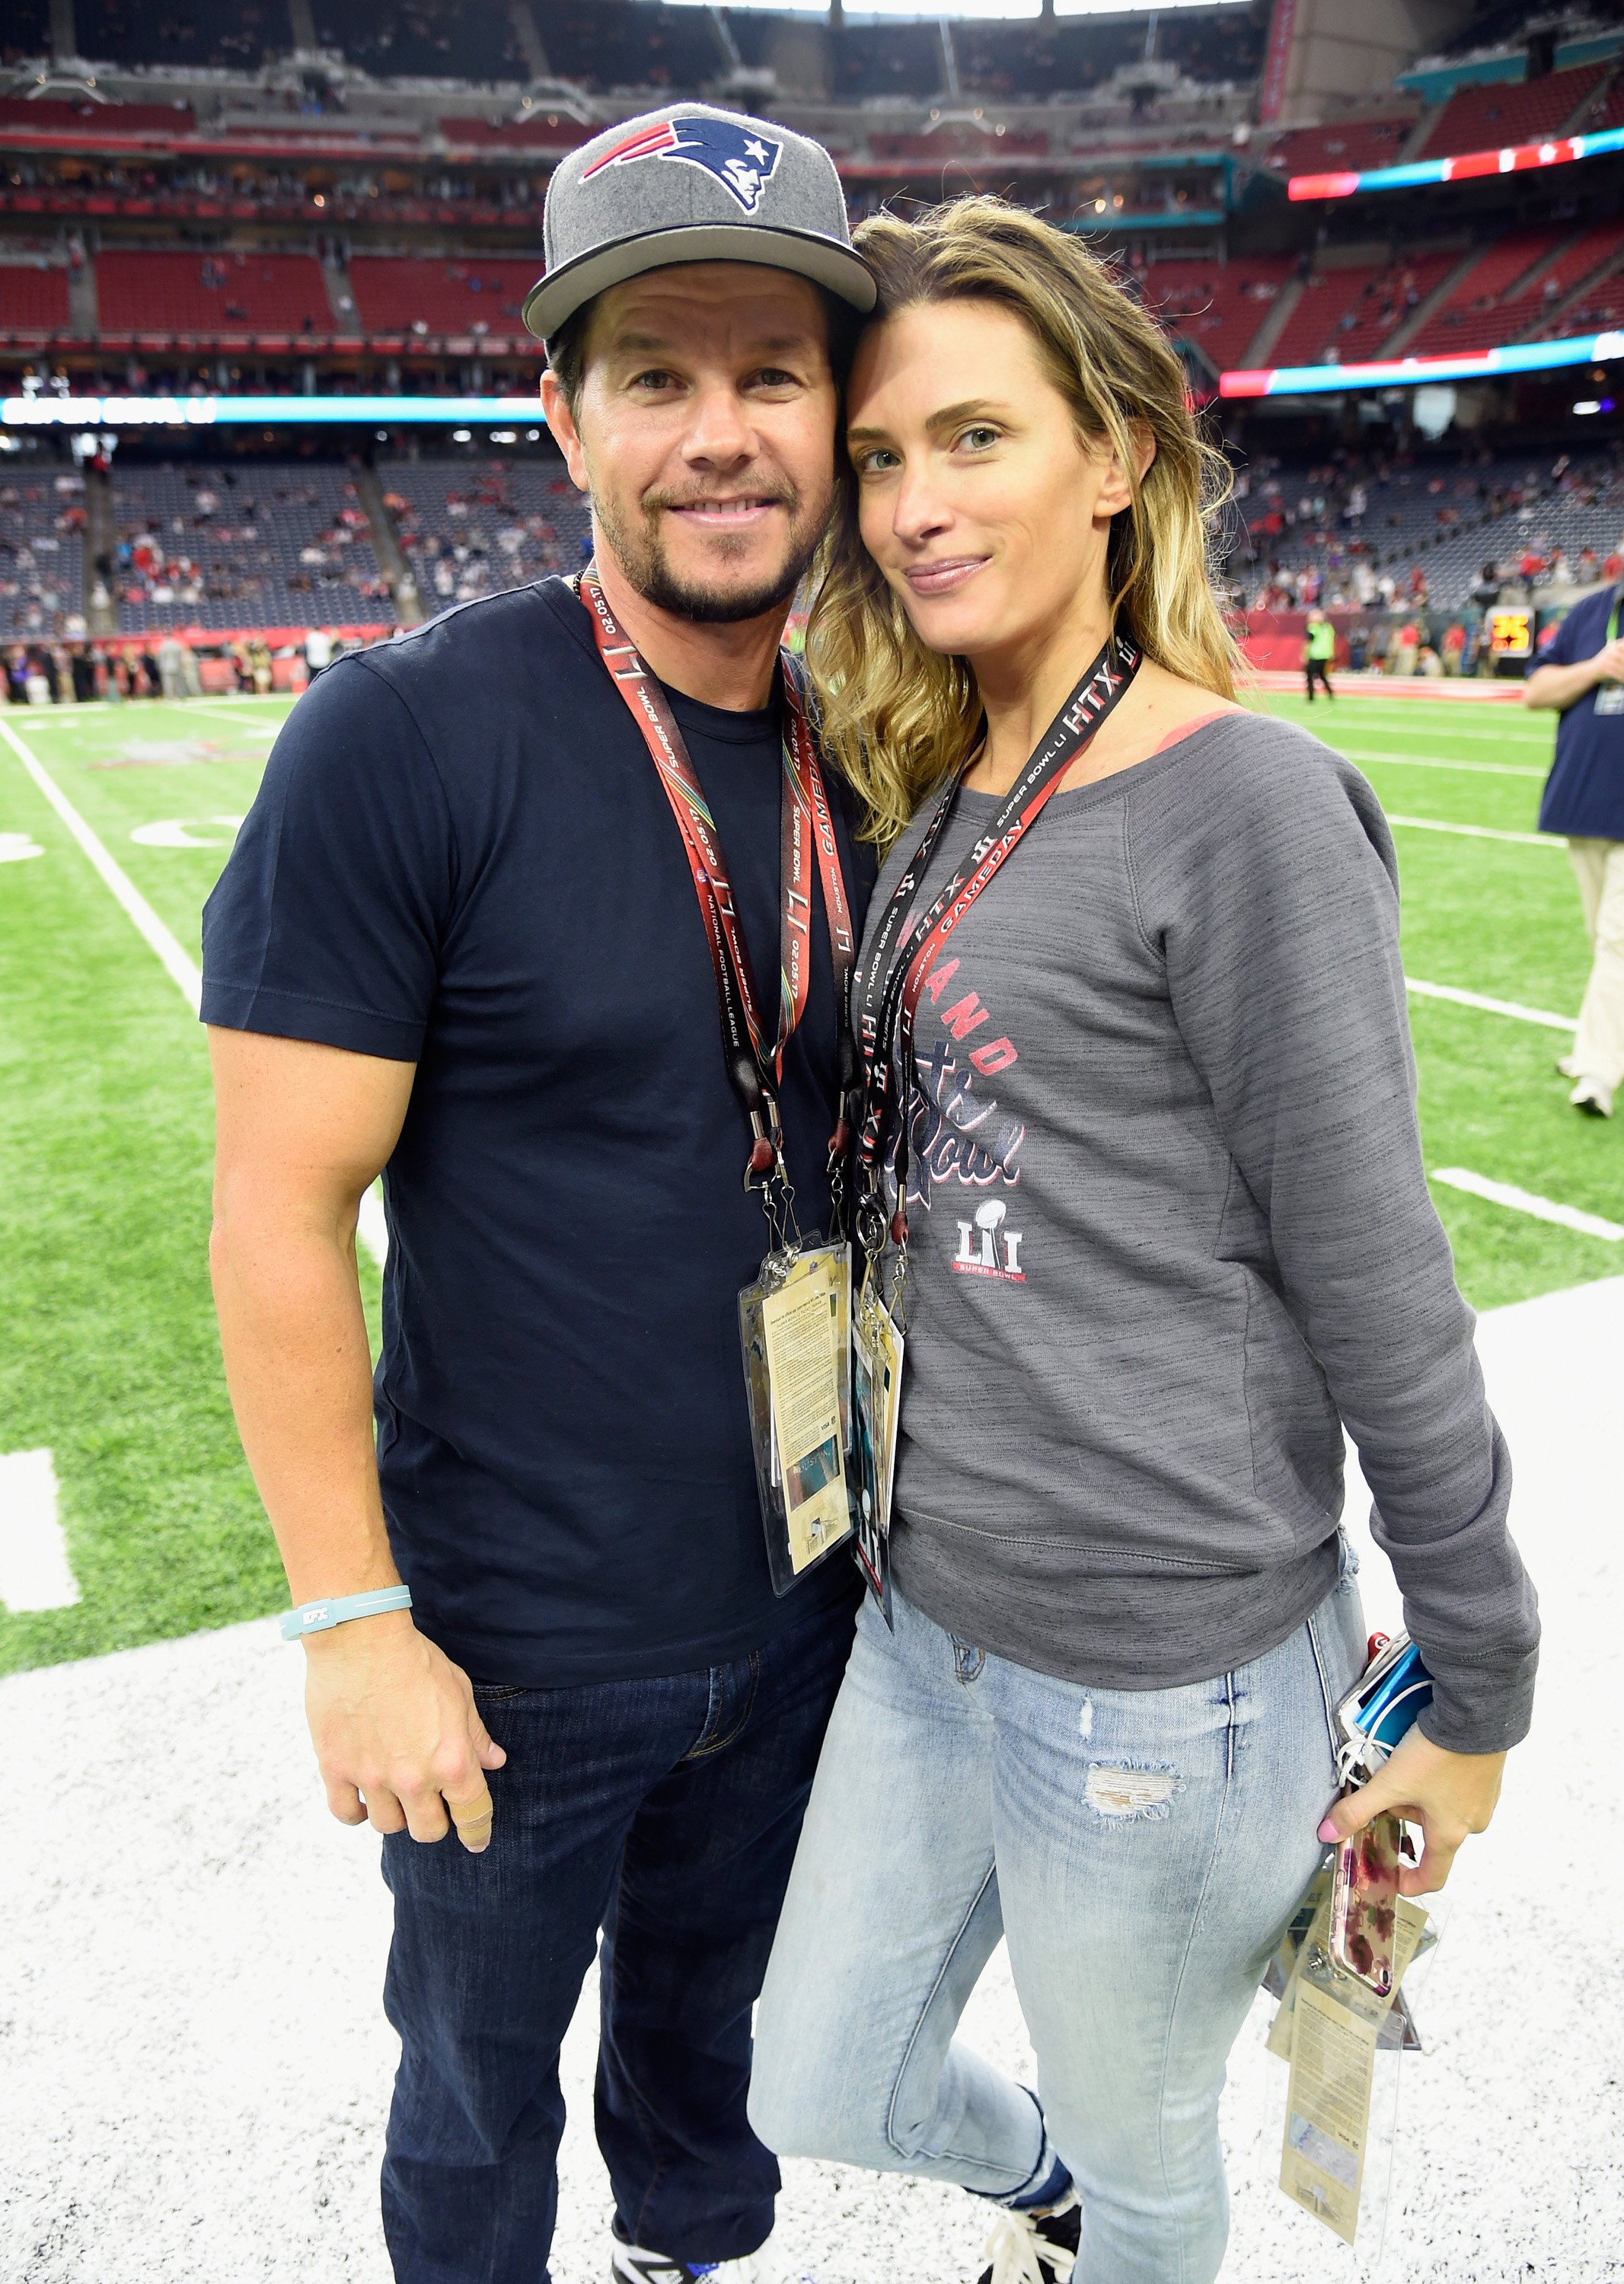 Mark Wahlberg and his wife Rhea at the Super Bowl in Texas Huston in 2017. | Source: Getty Images 